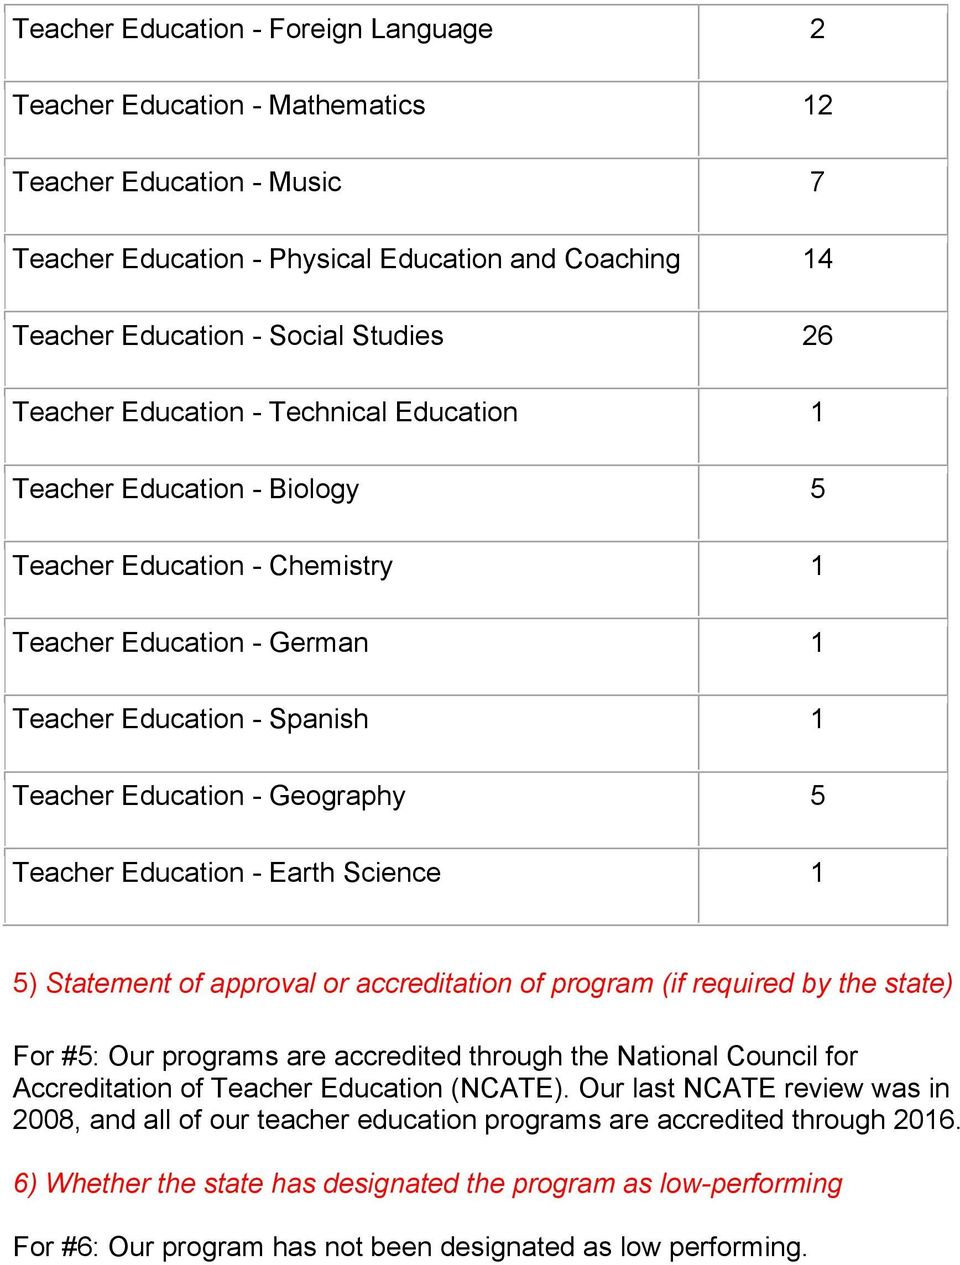 Teacher Education - Earth Science 1 5) Statement of approval or accreditation of program (if required by the state) For #5: Our programs are accredited through the National Council for Accreditation